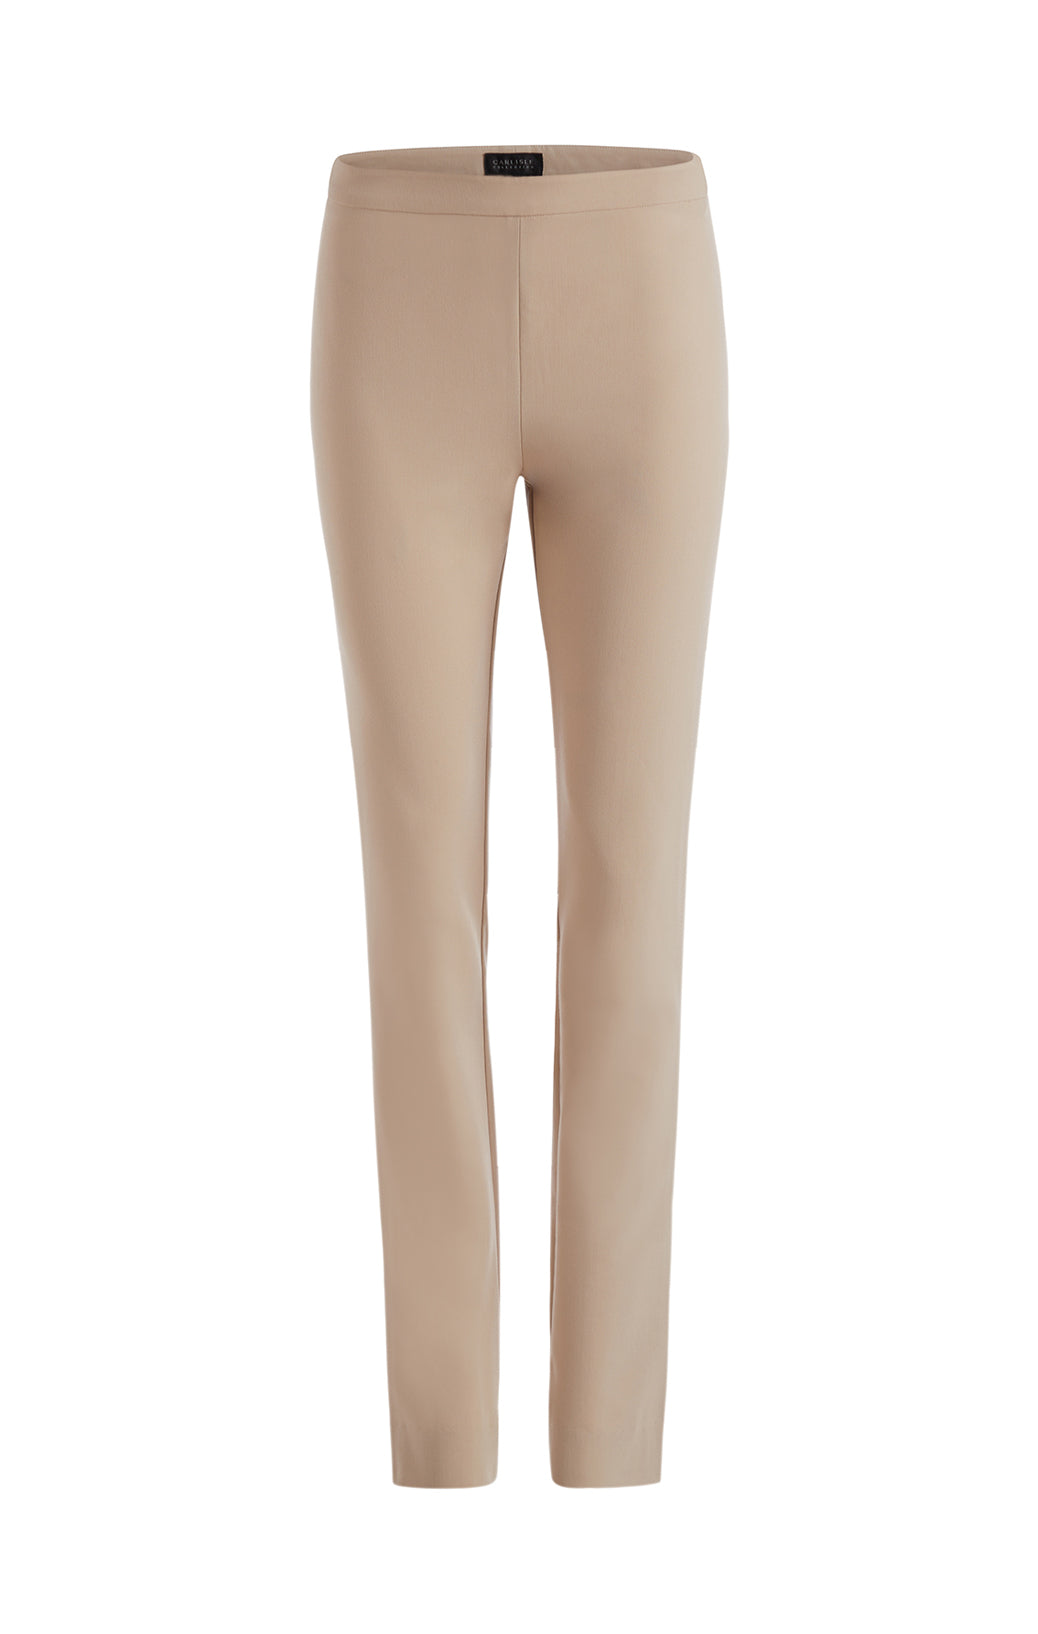 Signoret - Italian Stretch Twill Pants With Leather Drawcord - IMAGE